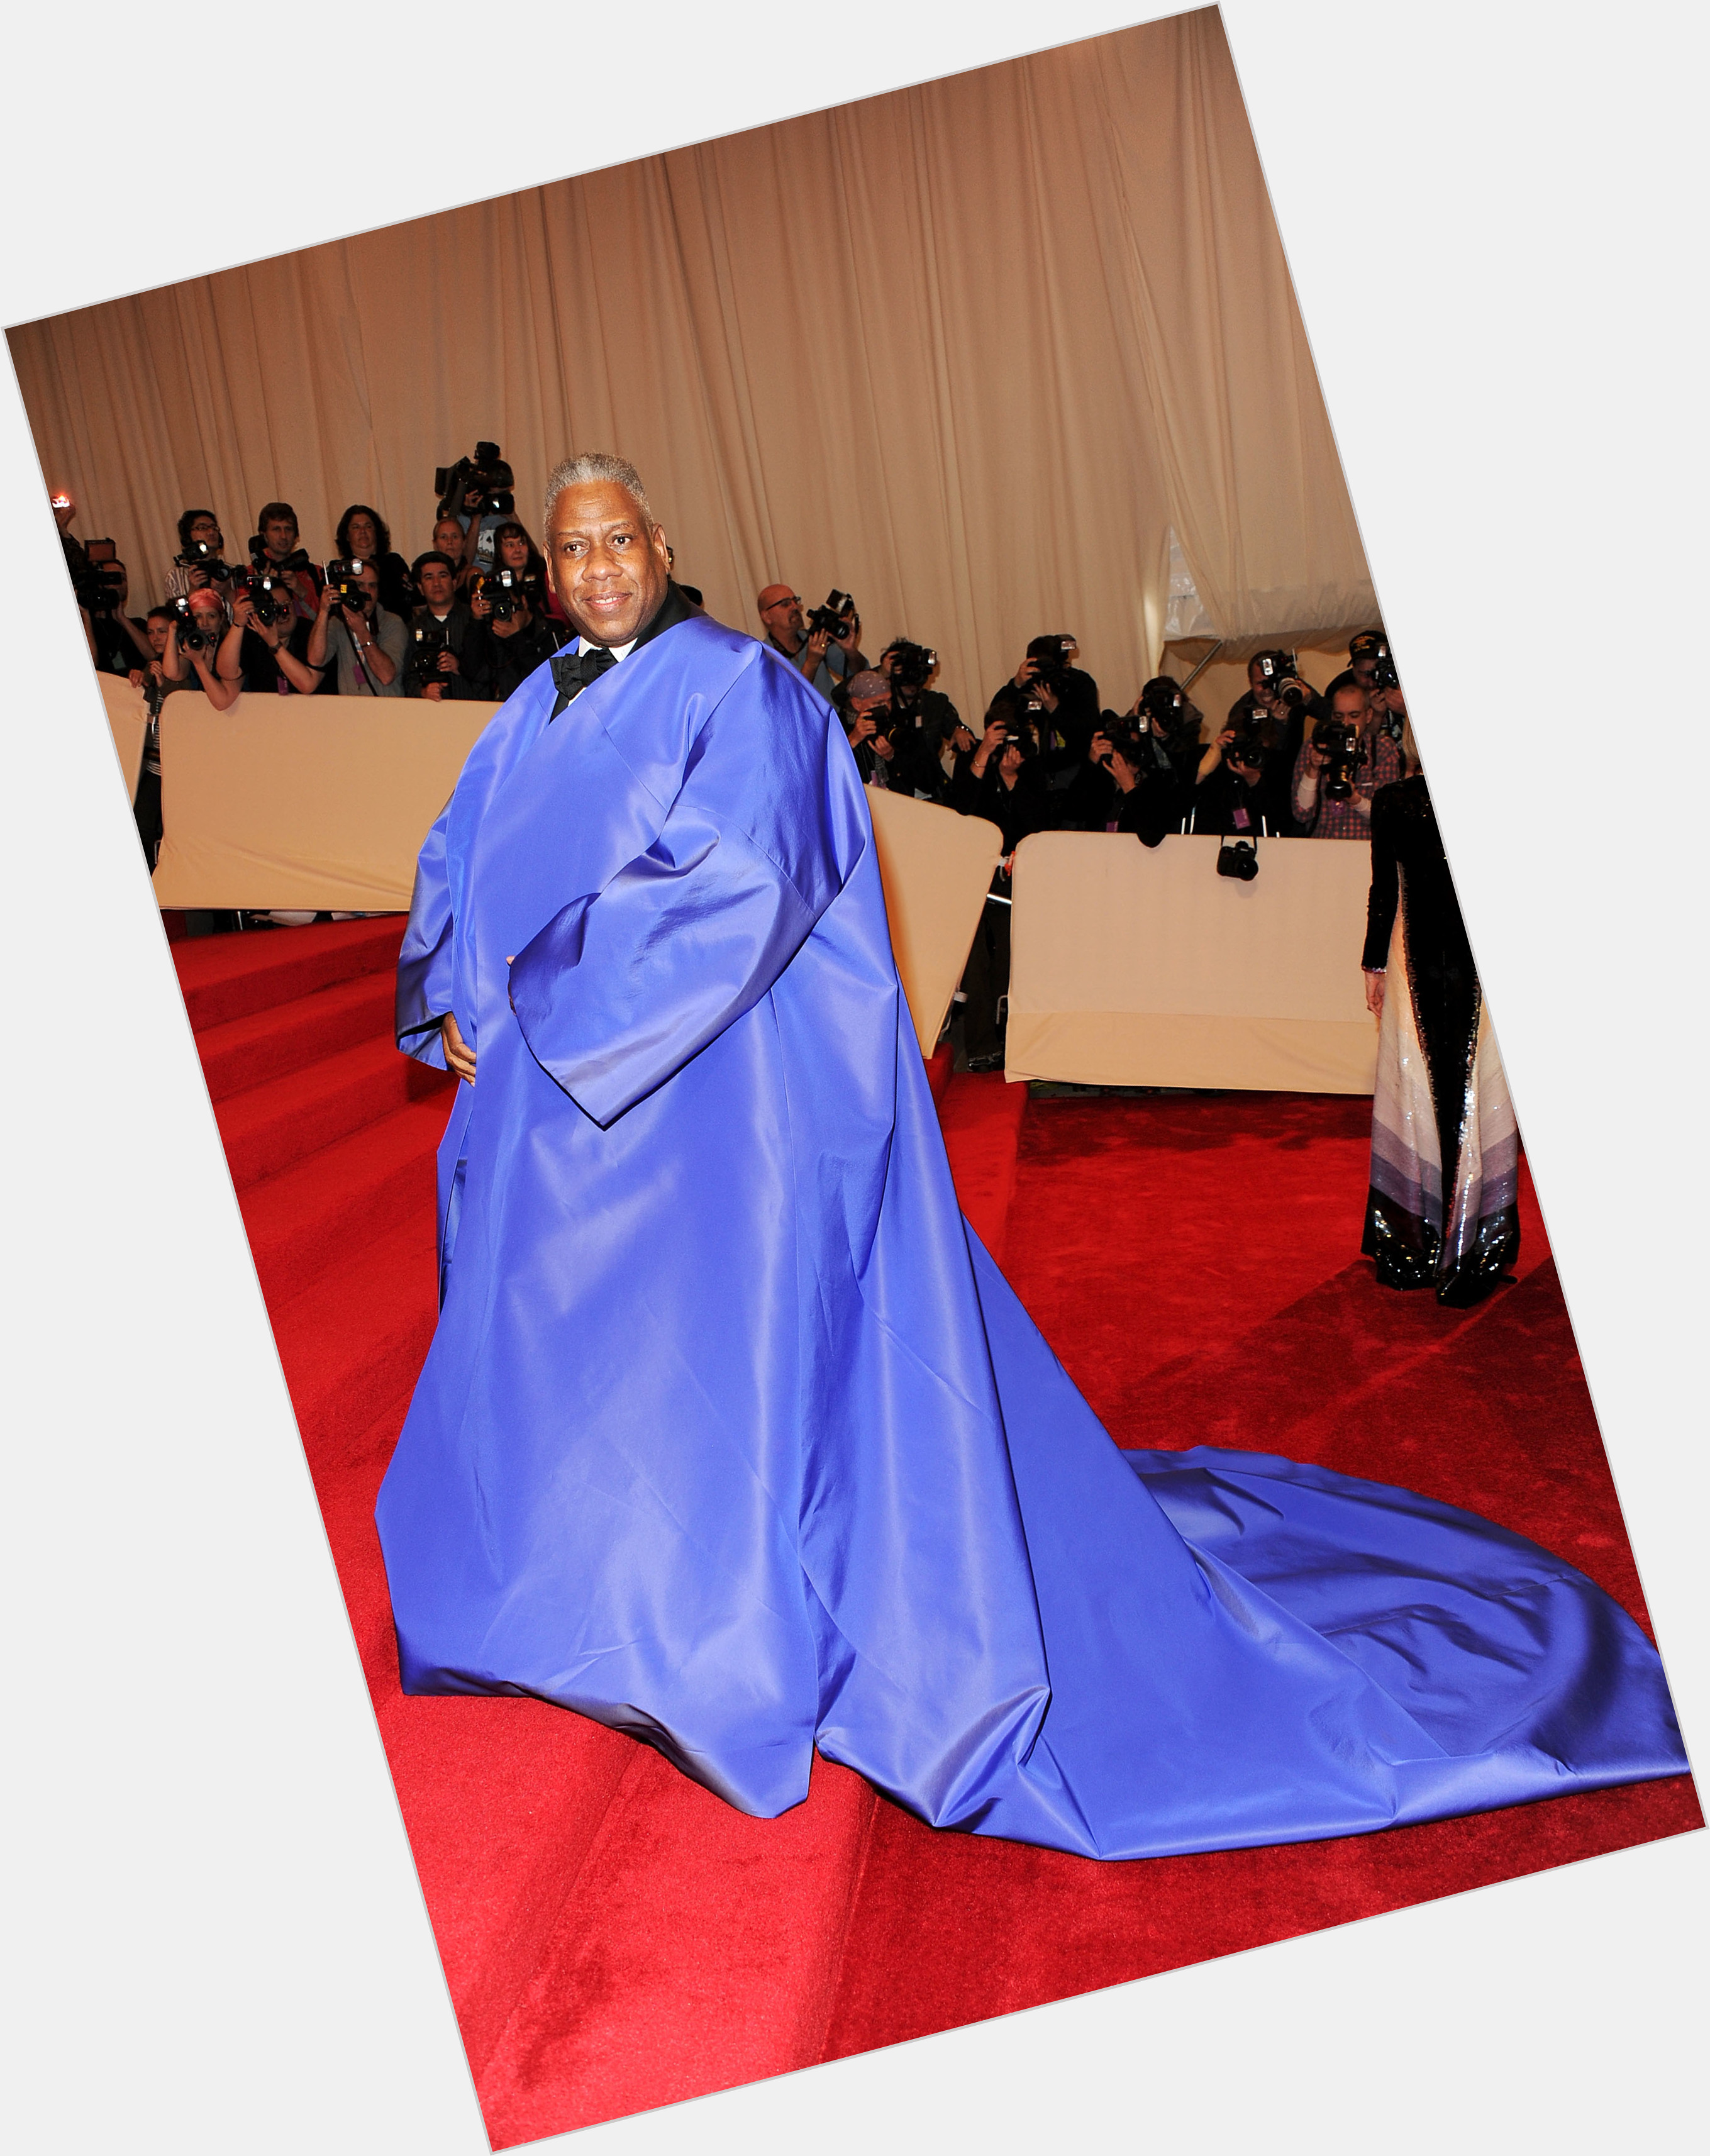 Andre Leon Talley Large body,  salt and pepper hair & hairstyles